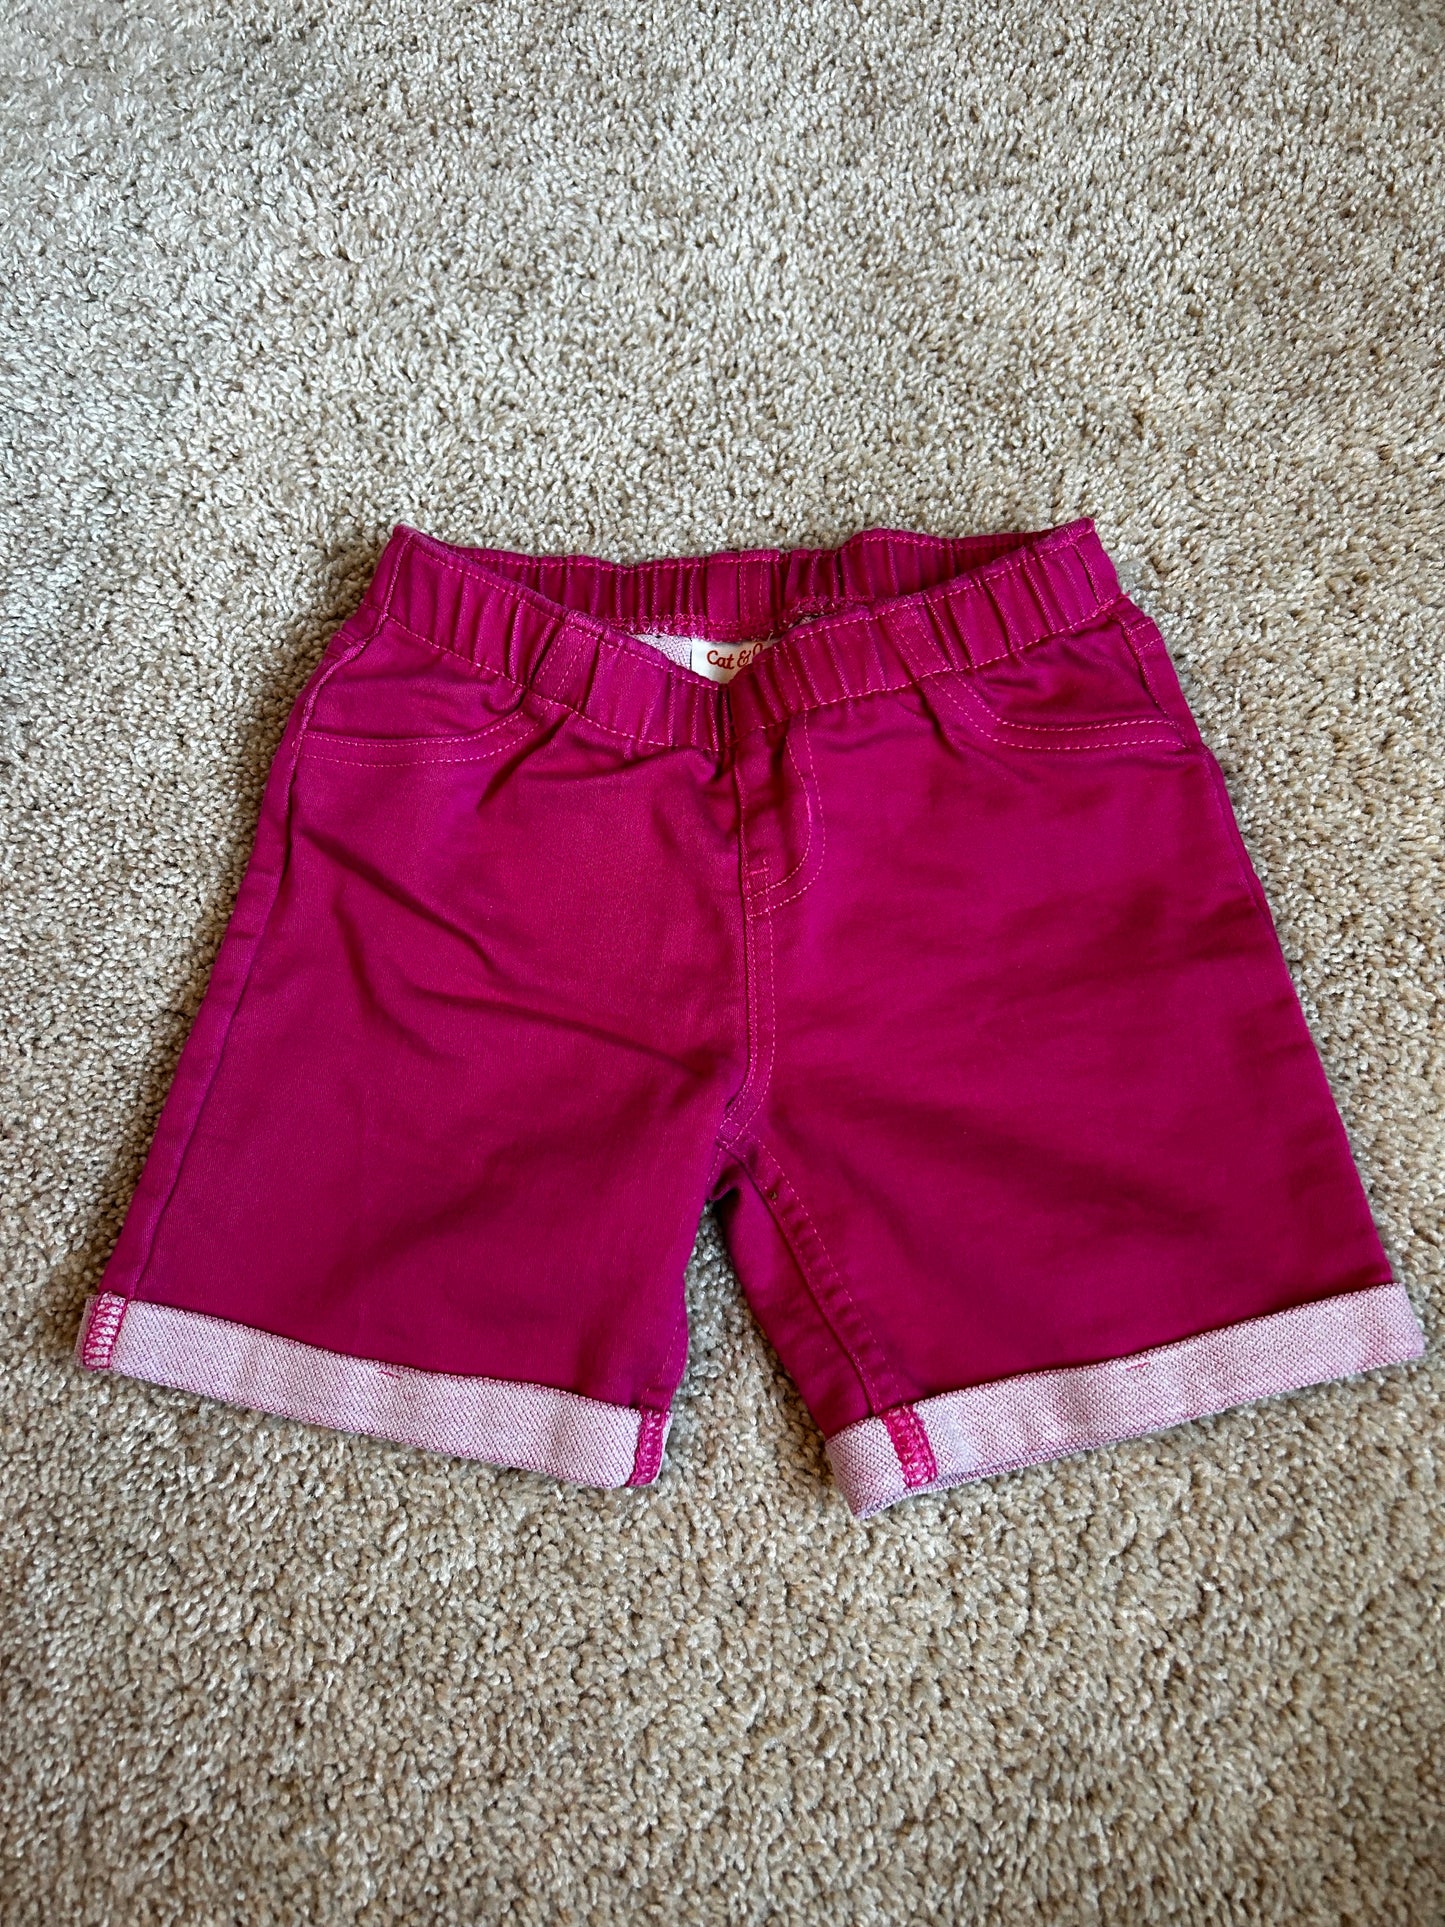 Cat and Jack 5T shorts